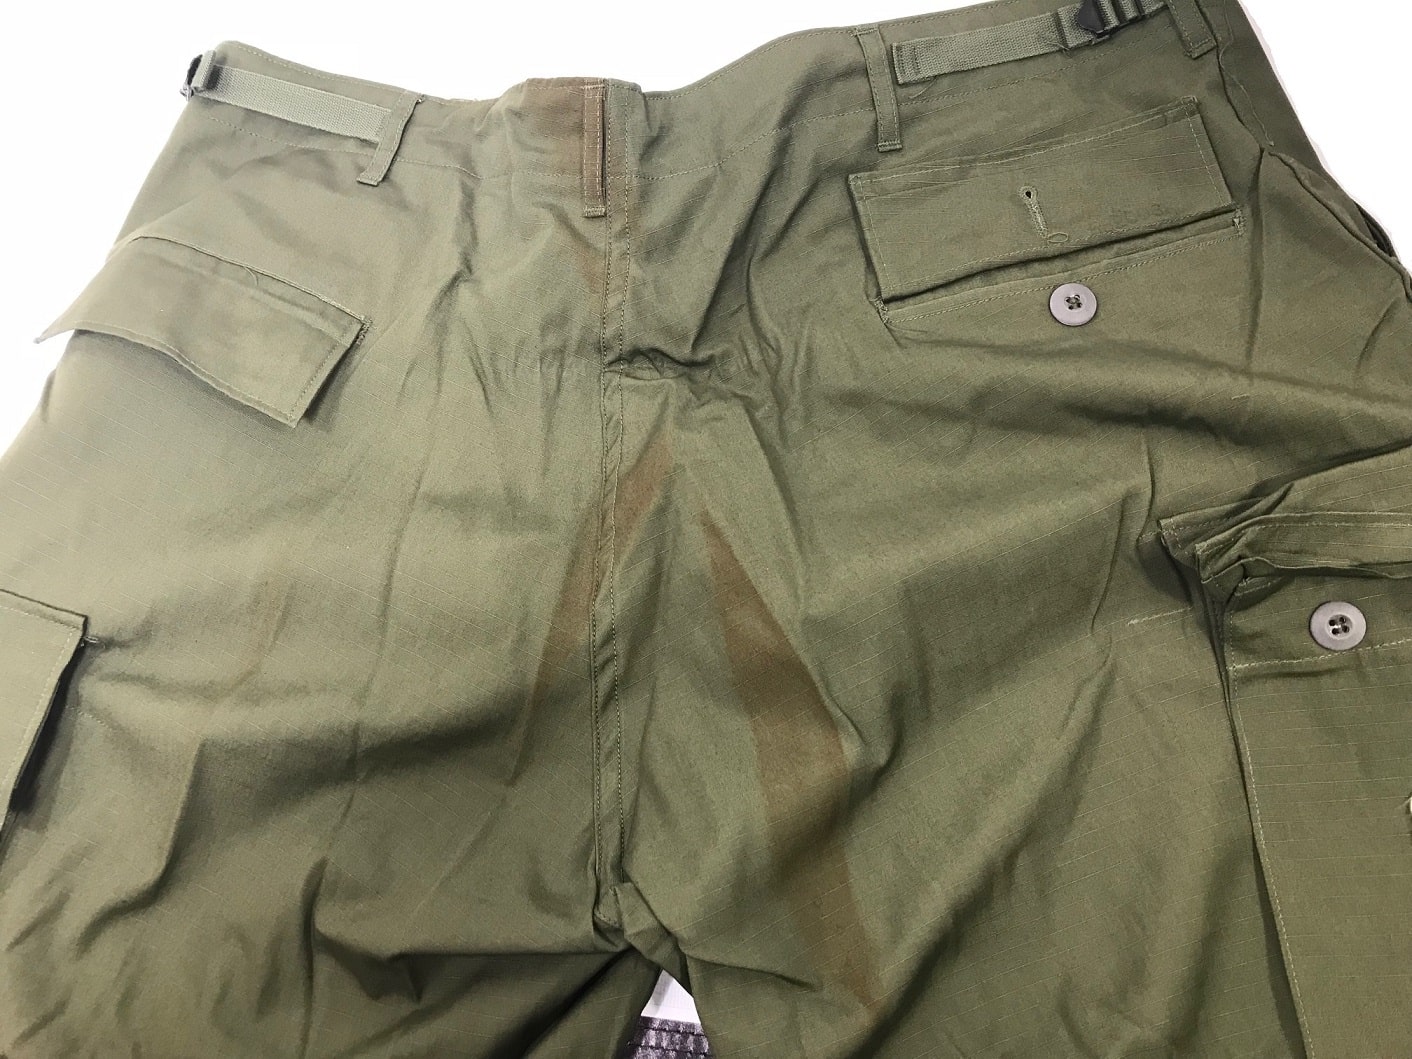 Vietnam Ripstop Jungle Pants X-large Regular-stained